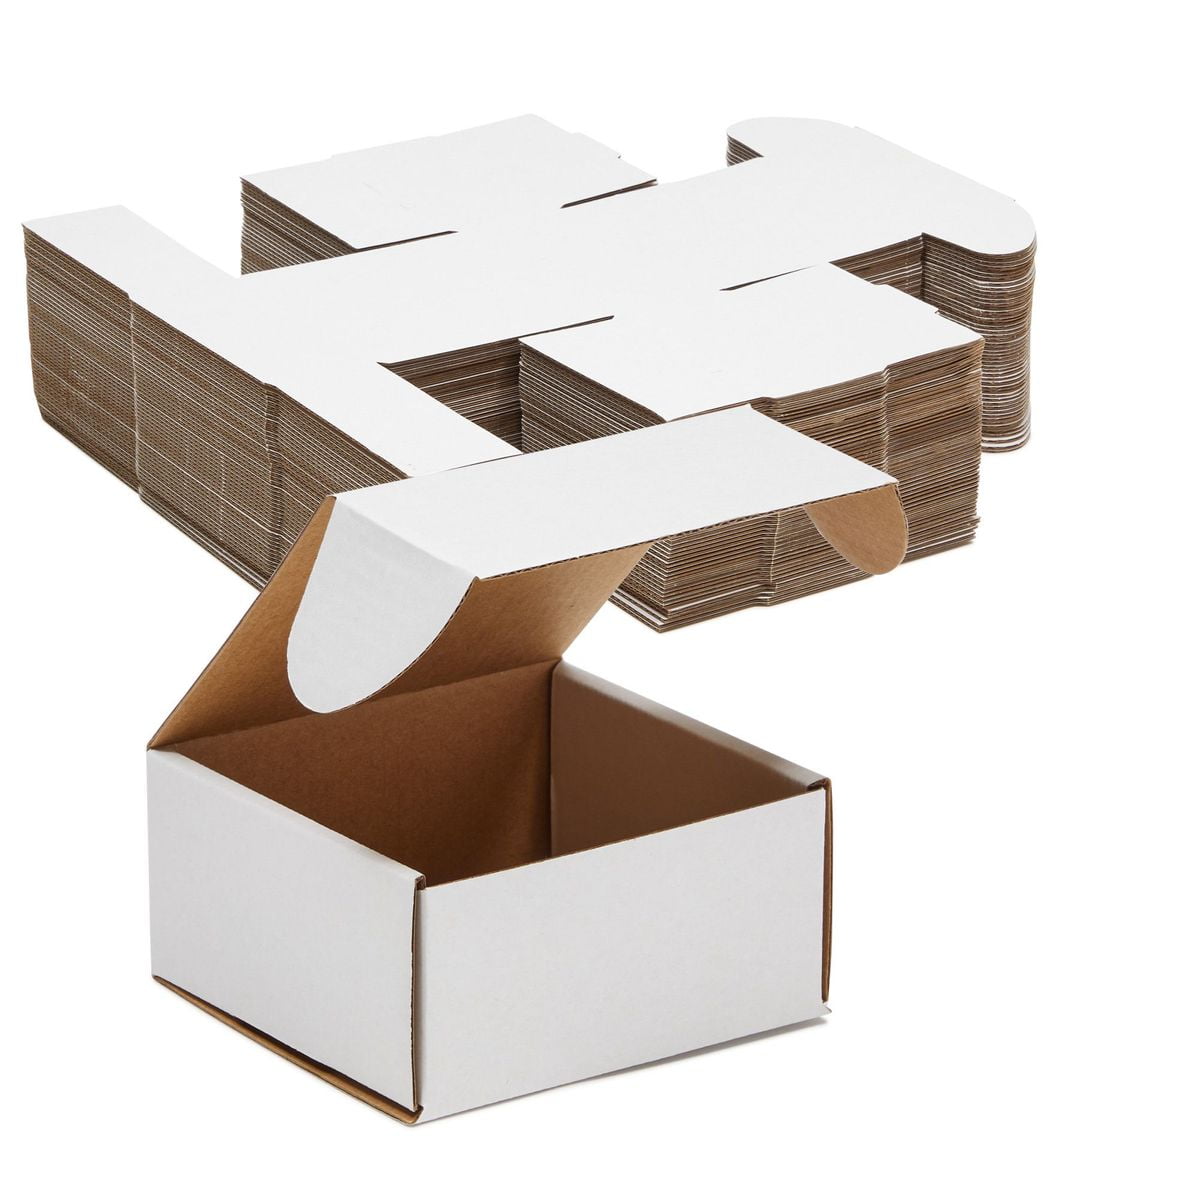 500-6 x 3 x 3 White Corrugated Shipping Mailer Packing Box Boxes 